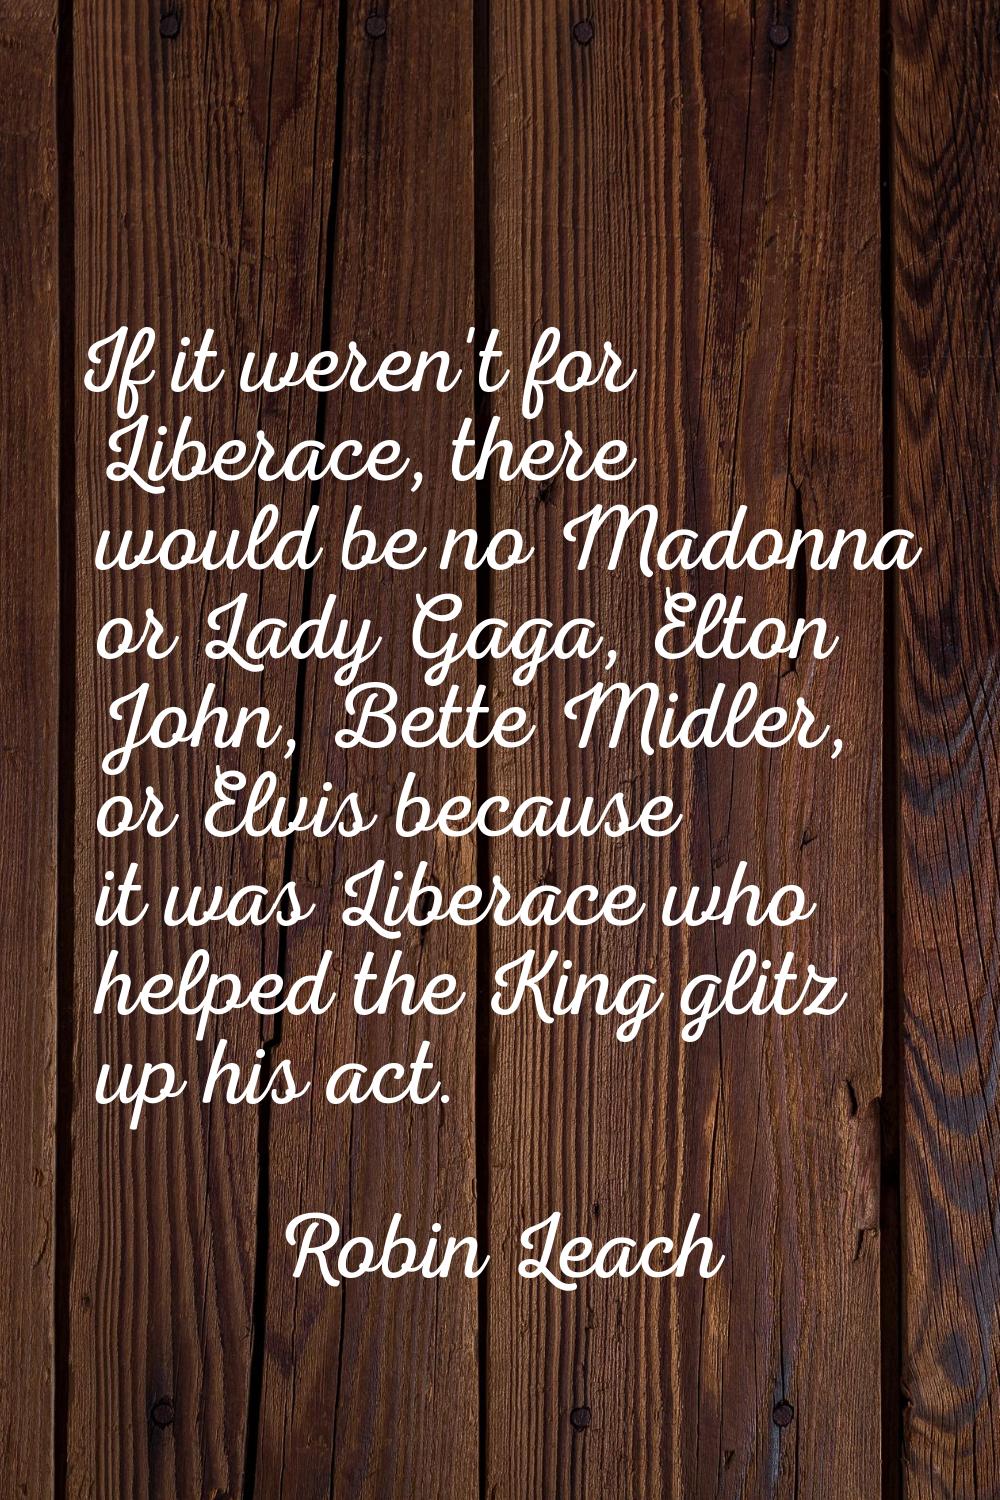 If it weren't for Liberace, there would be no Madonna or Lady Gaga, Elton John, Bette Midler, or El